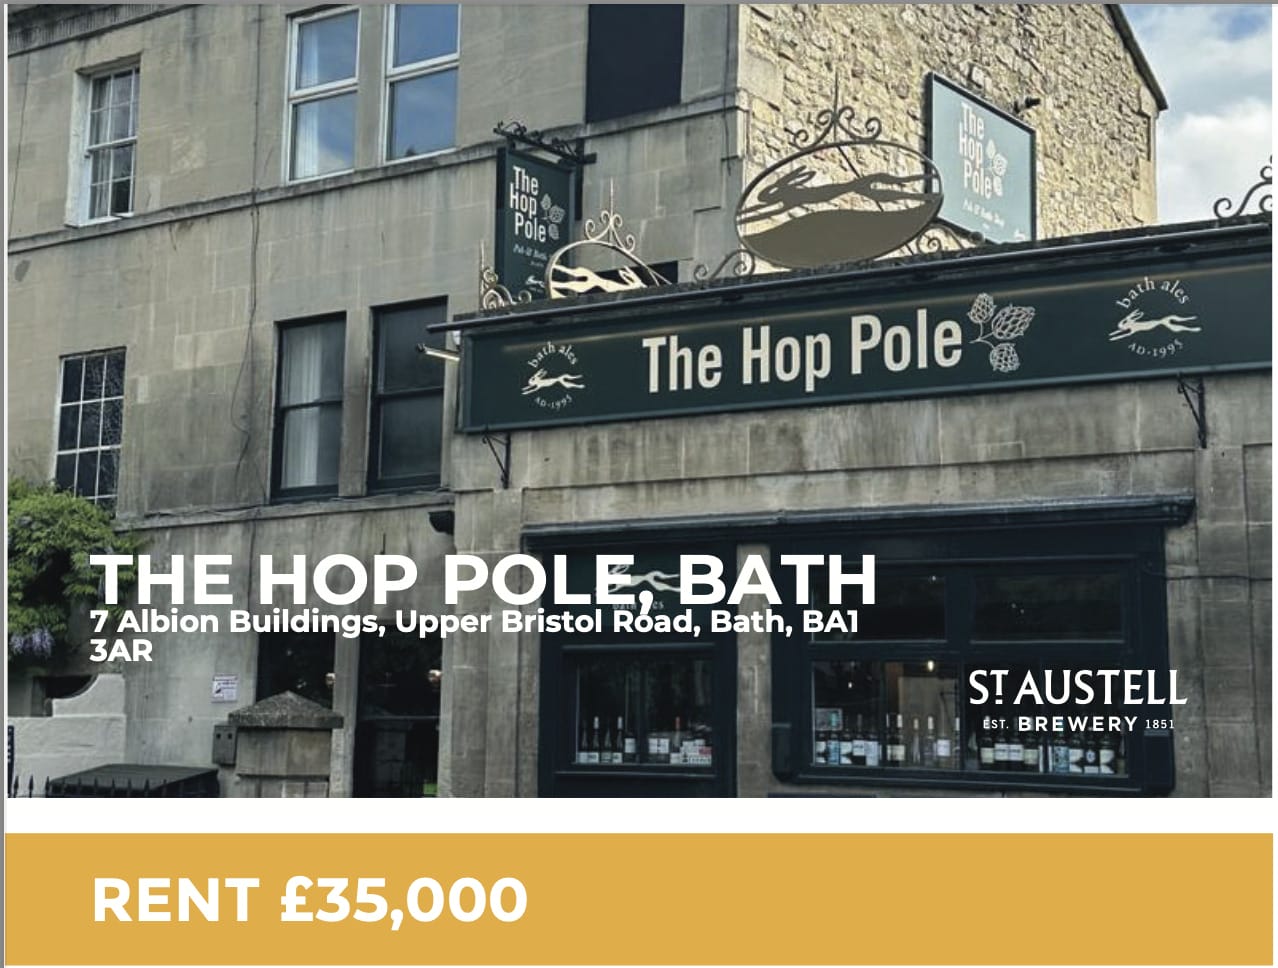 Pubs To Let In Bath – The Hop Pole Is Available !